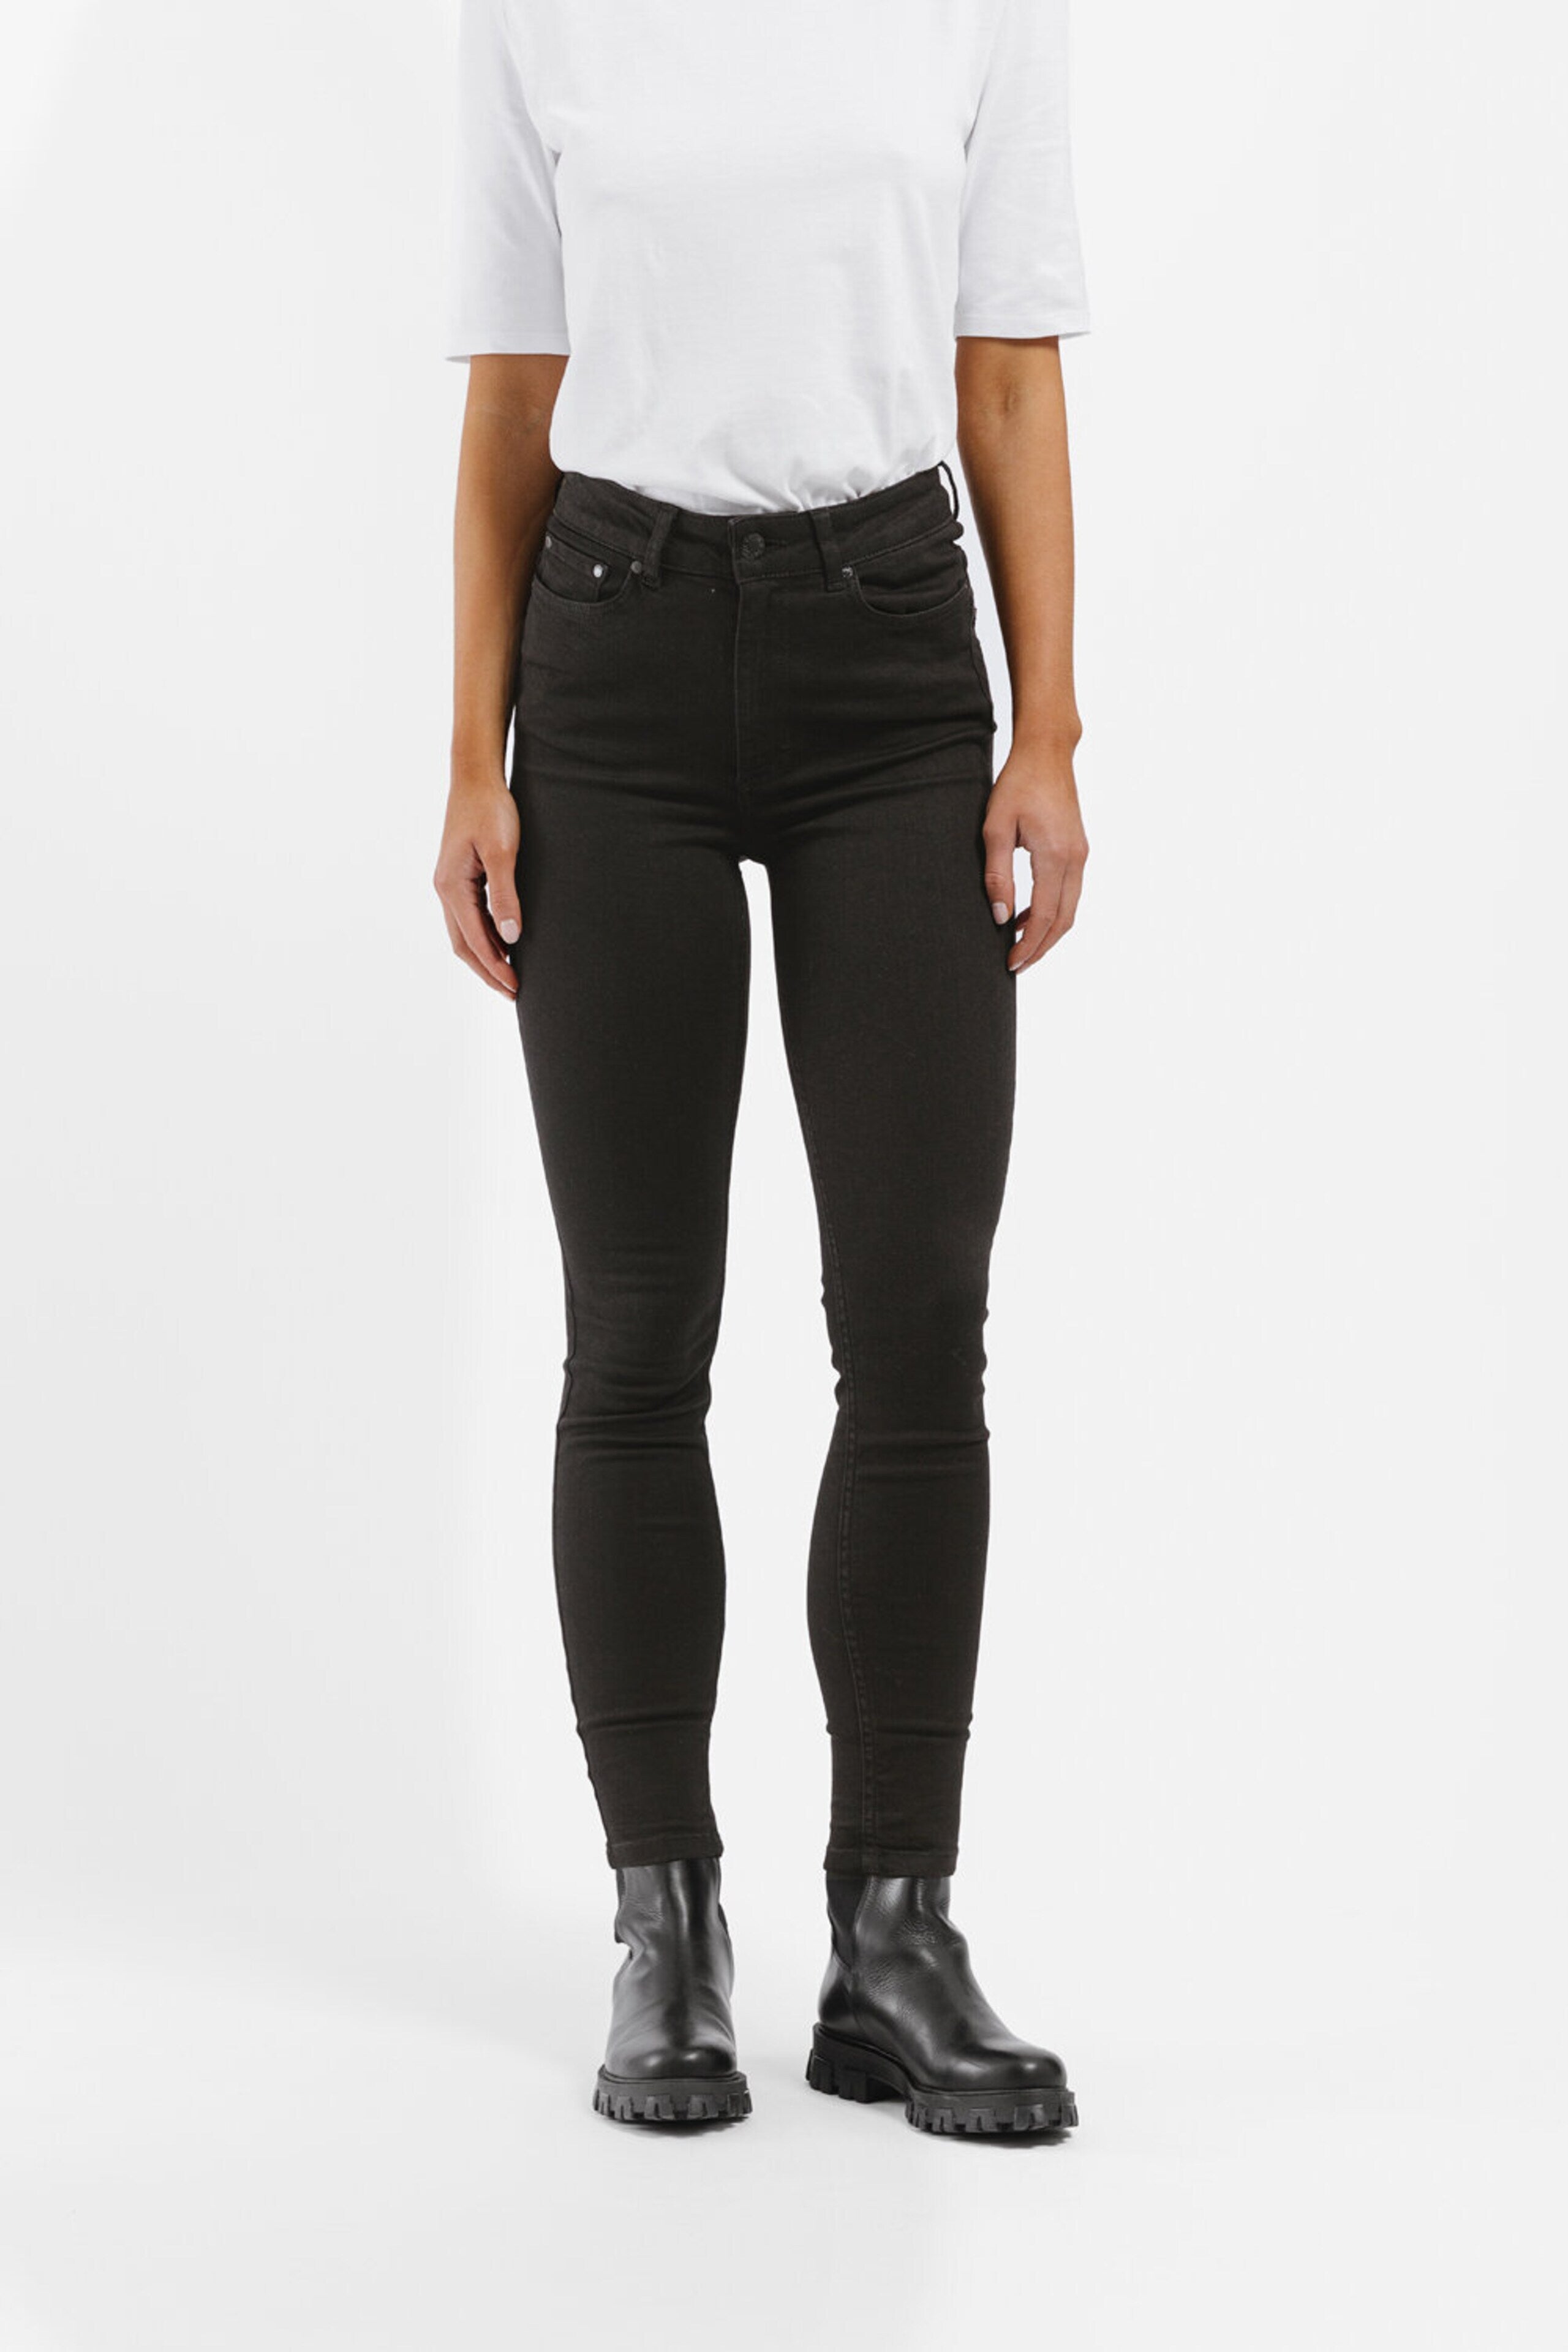 A woman wearing Julie High Waist Skinny Jeans - Black from Twist & Tango, which are super stretch black jeans with a high waist and an ankle length.